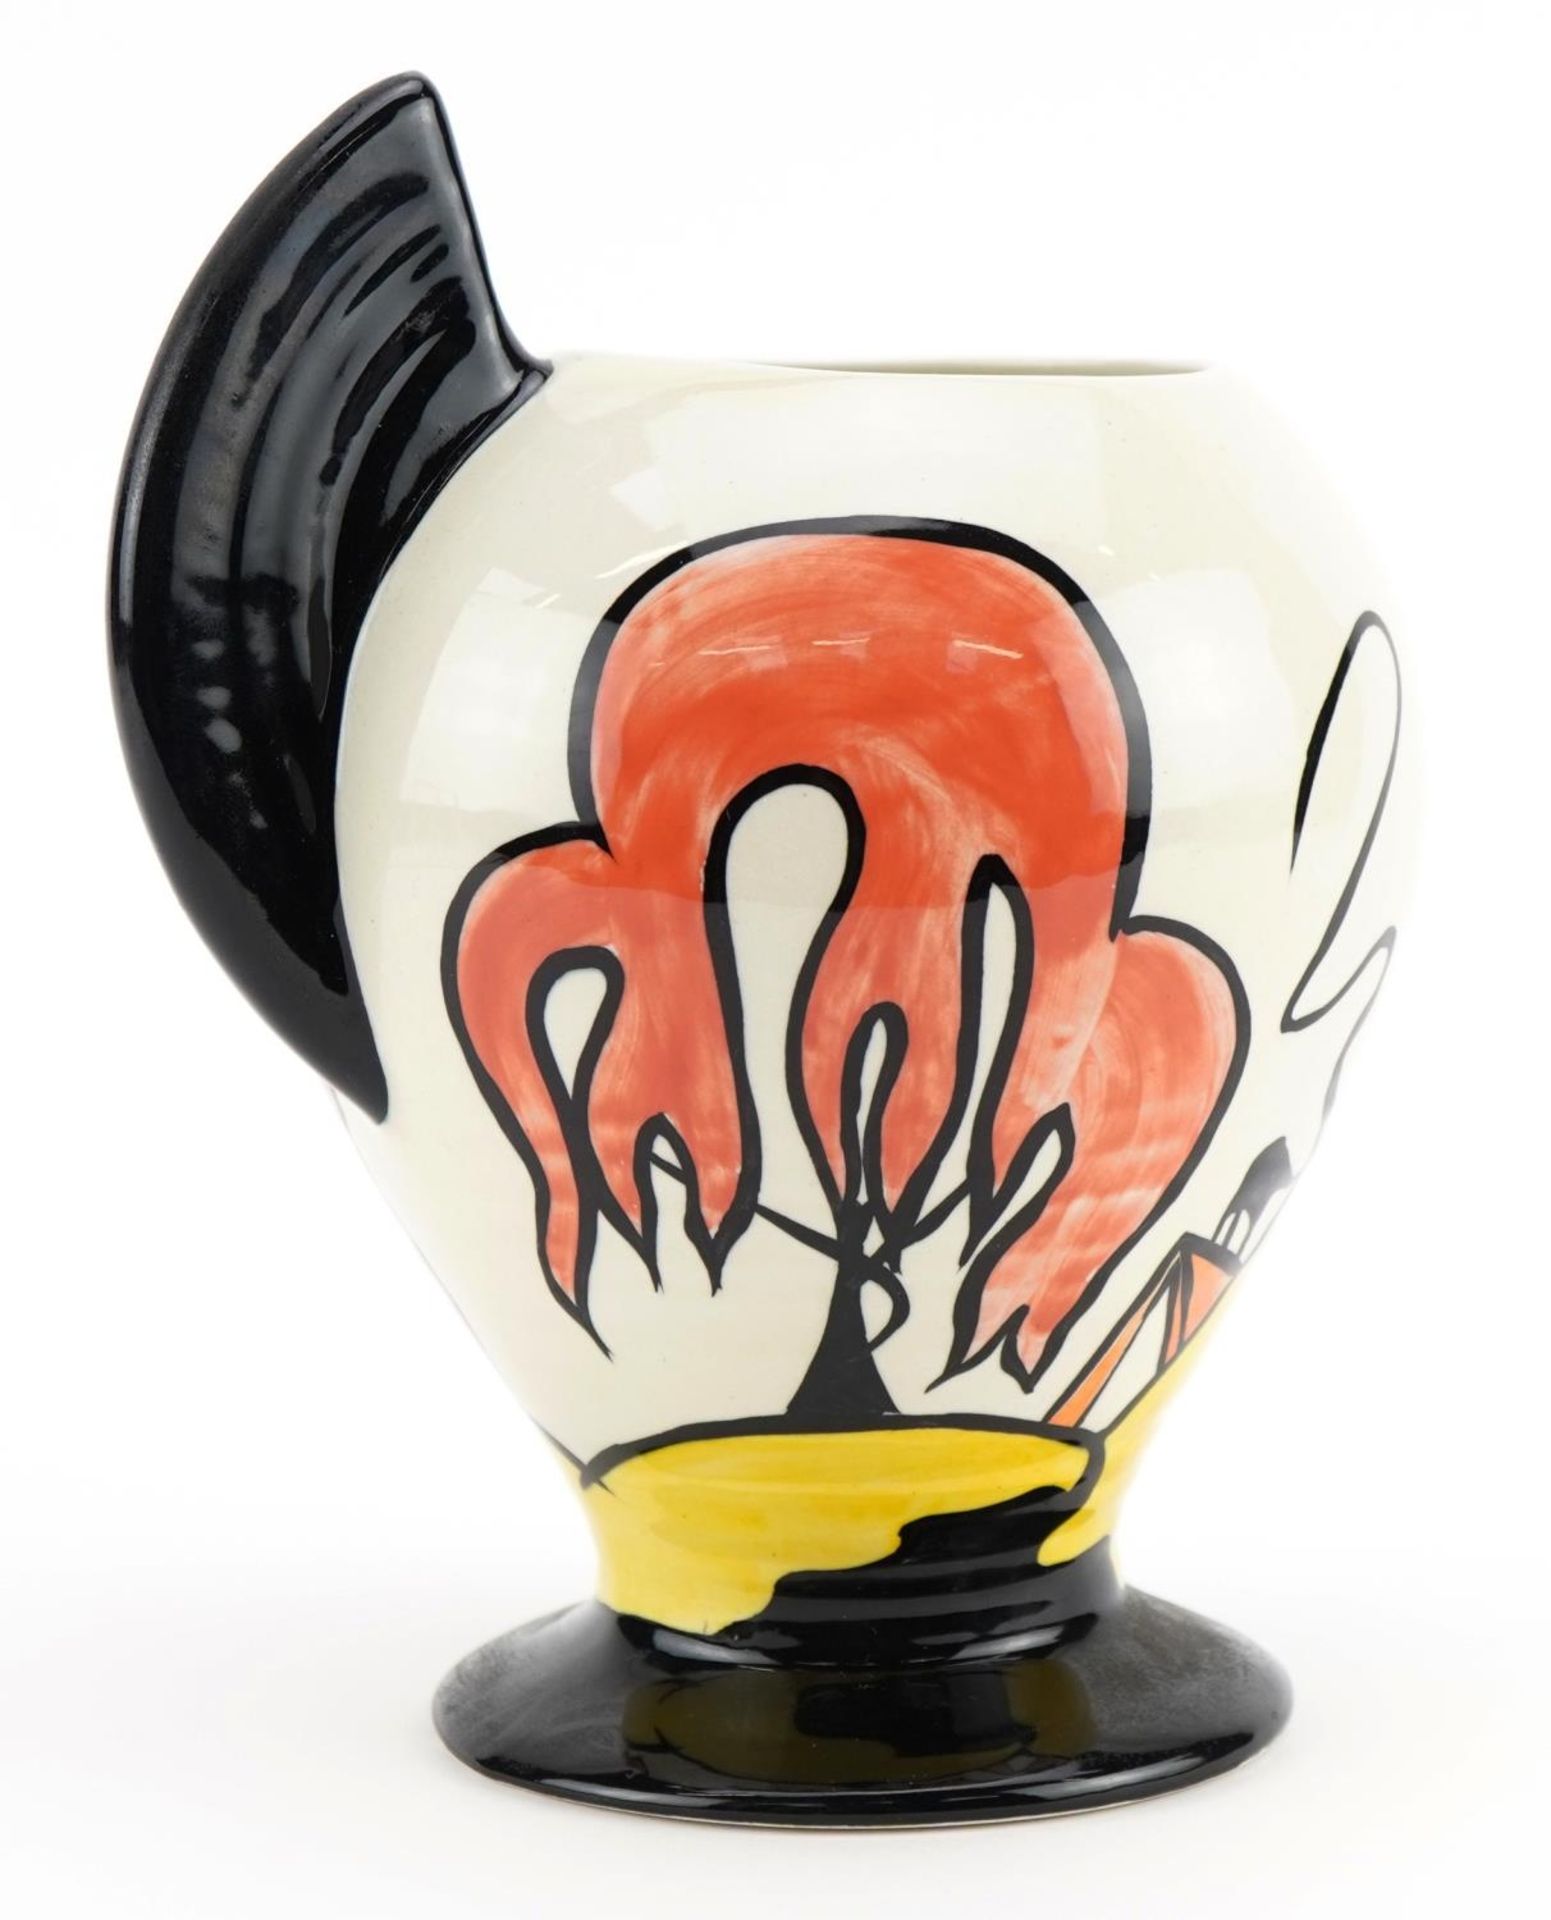 Lorna Bailey vase hand painted and inscribed The Dingle, Porthill to the base, 16.5cm high - Image 2 of 4